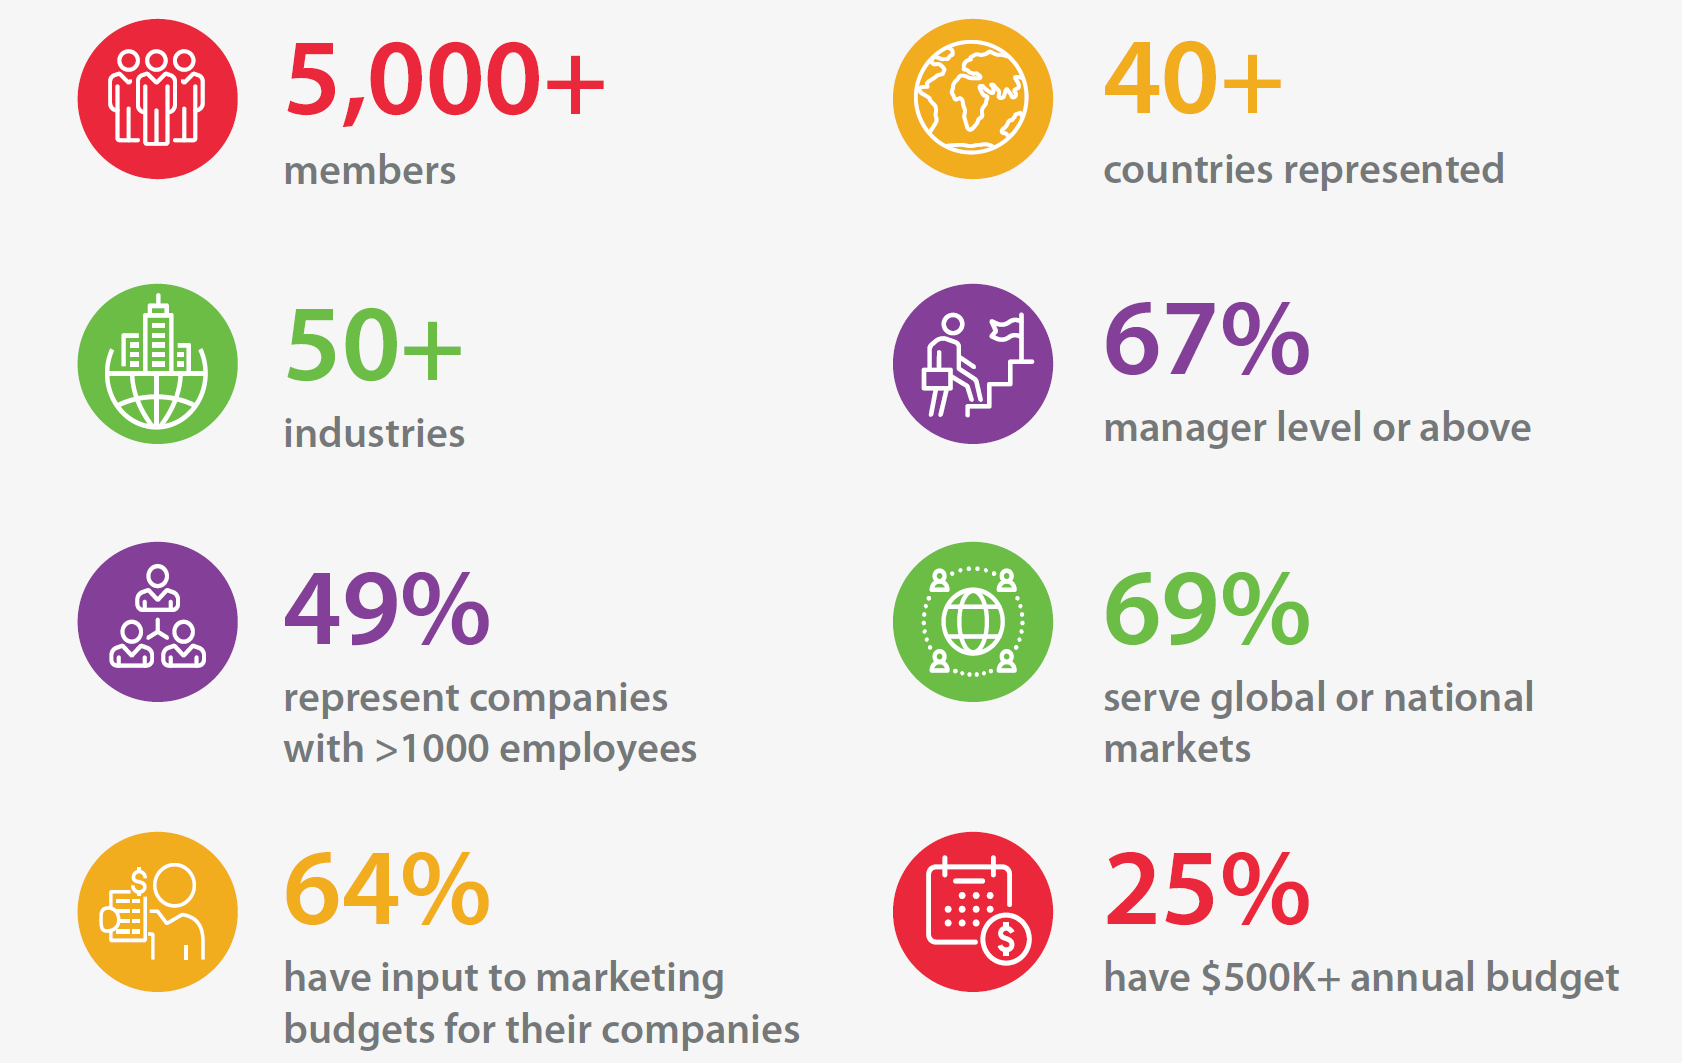 5000+ members; 40+ countries represented; 50+ industries; 67% manager level or above; 49% represent companies with over 1000 employees; 69% serve global or national markets; 64% have input to marketing budgets; 25% have $500K+ annual budget